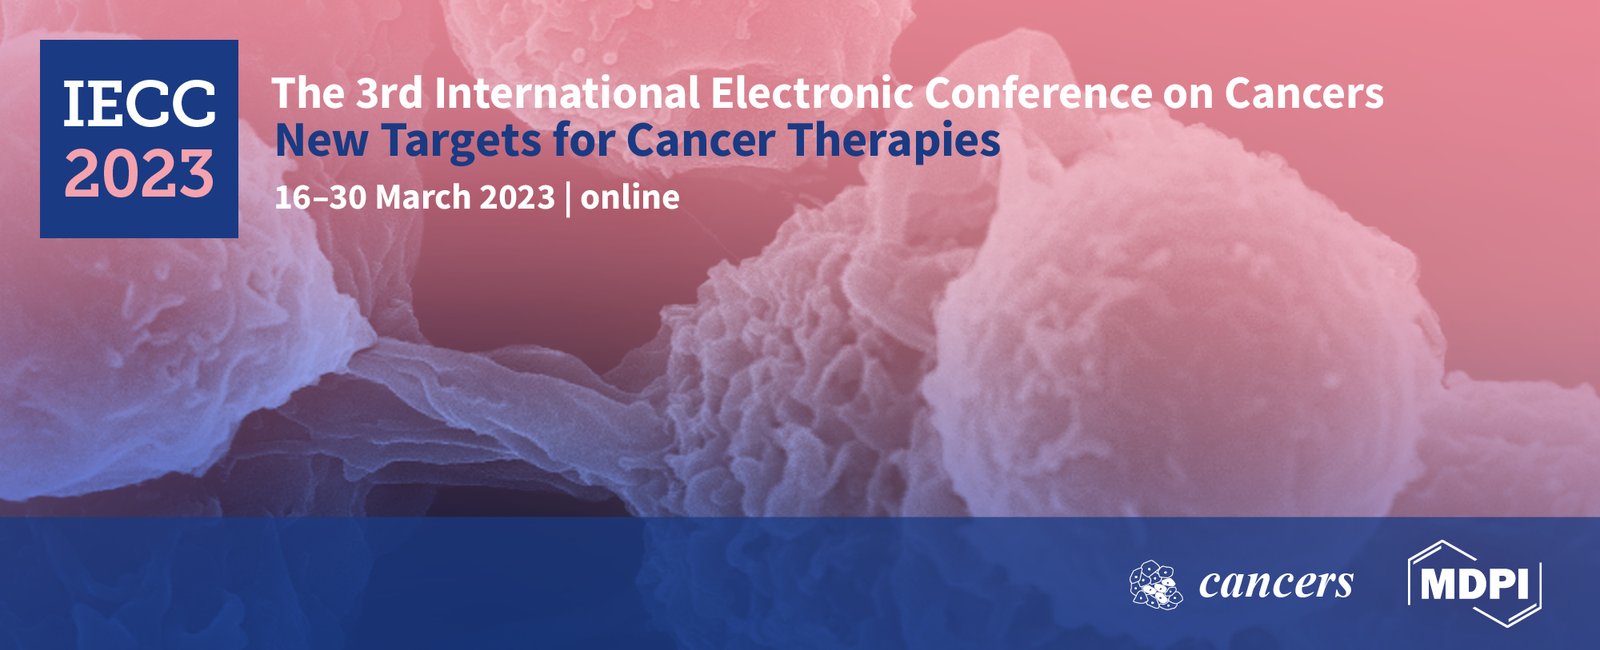 The 3rd International Electronic Conference on Cancers New Targets for